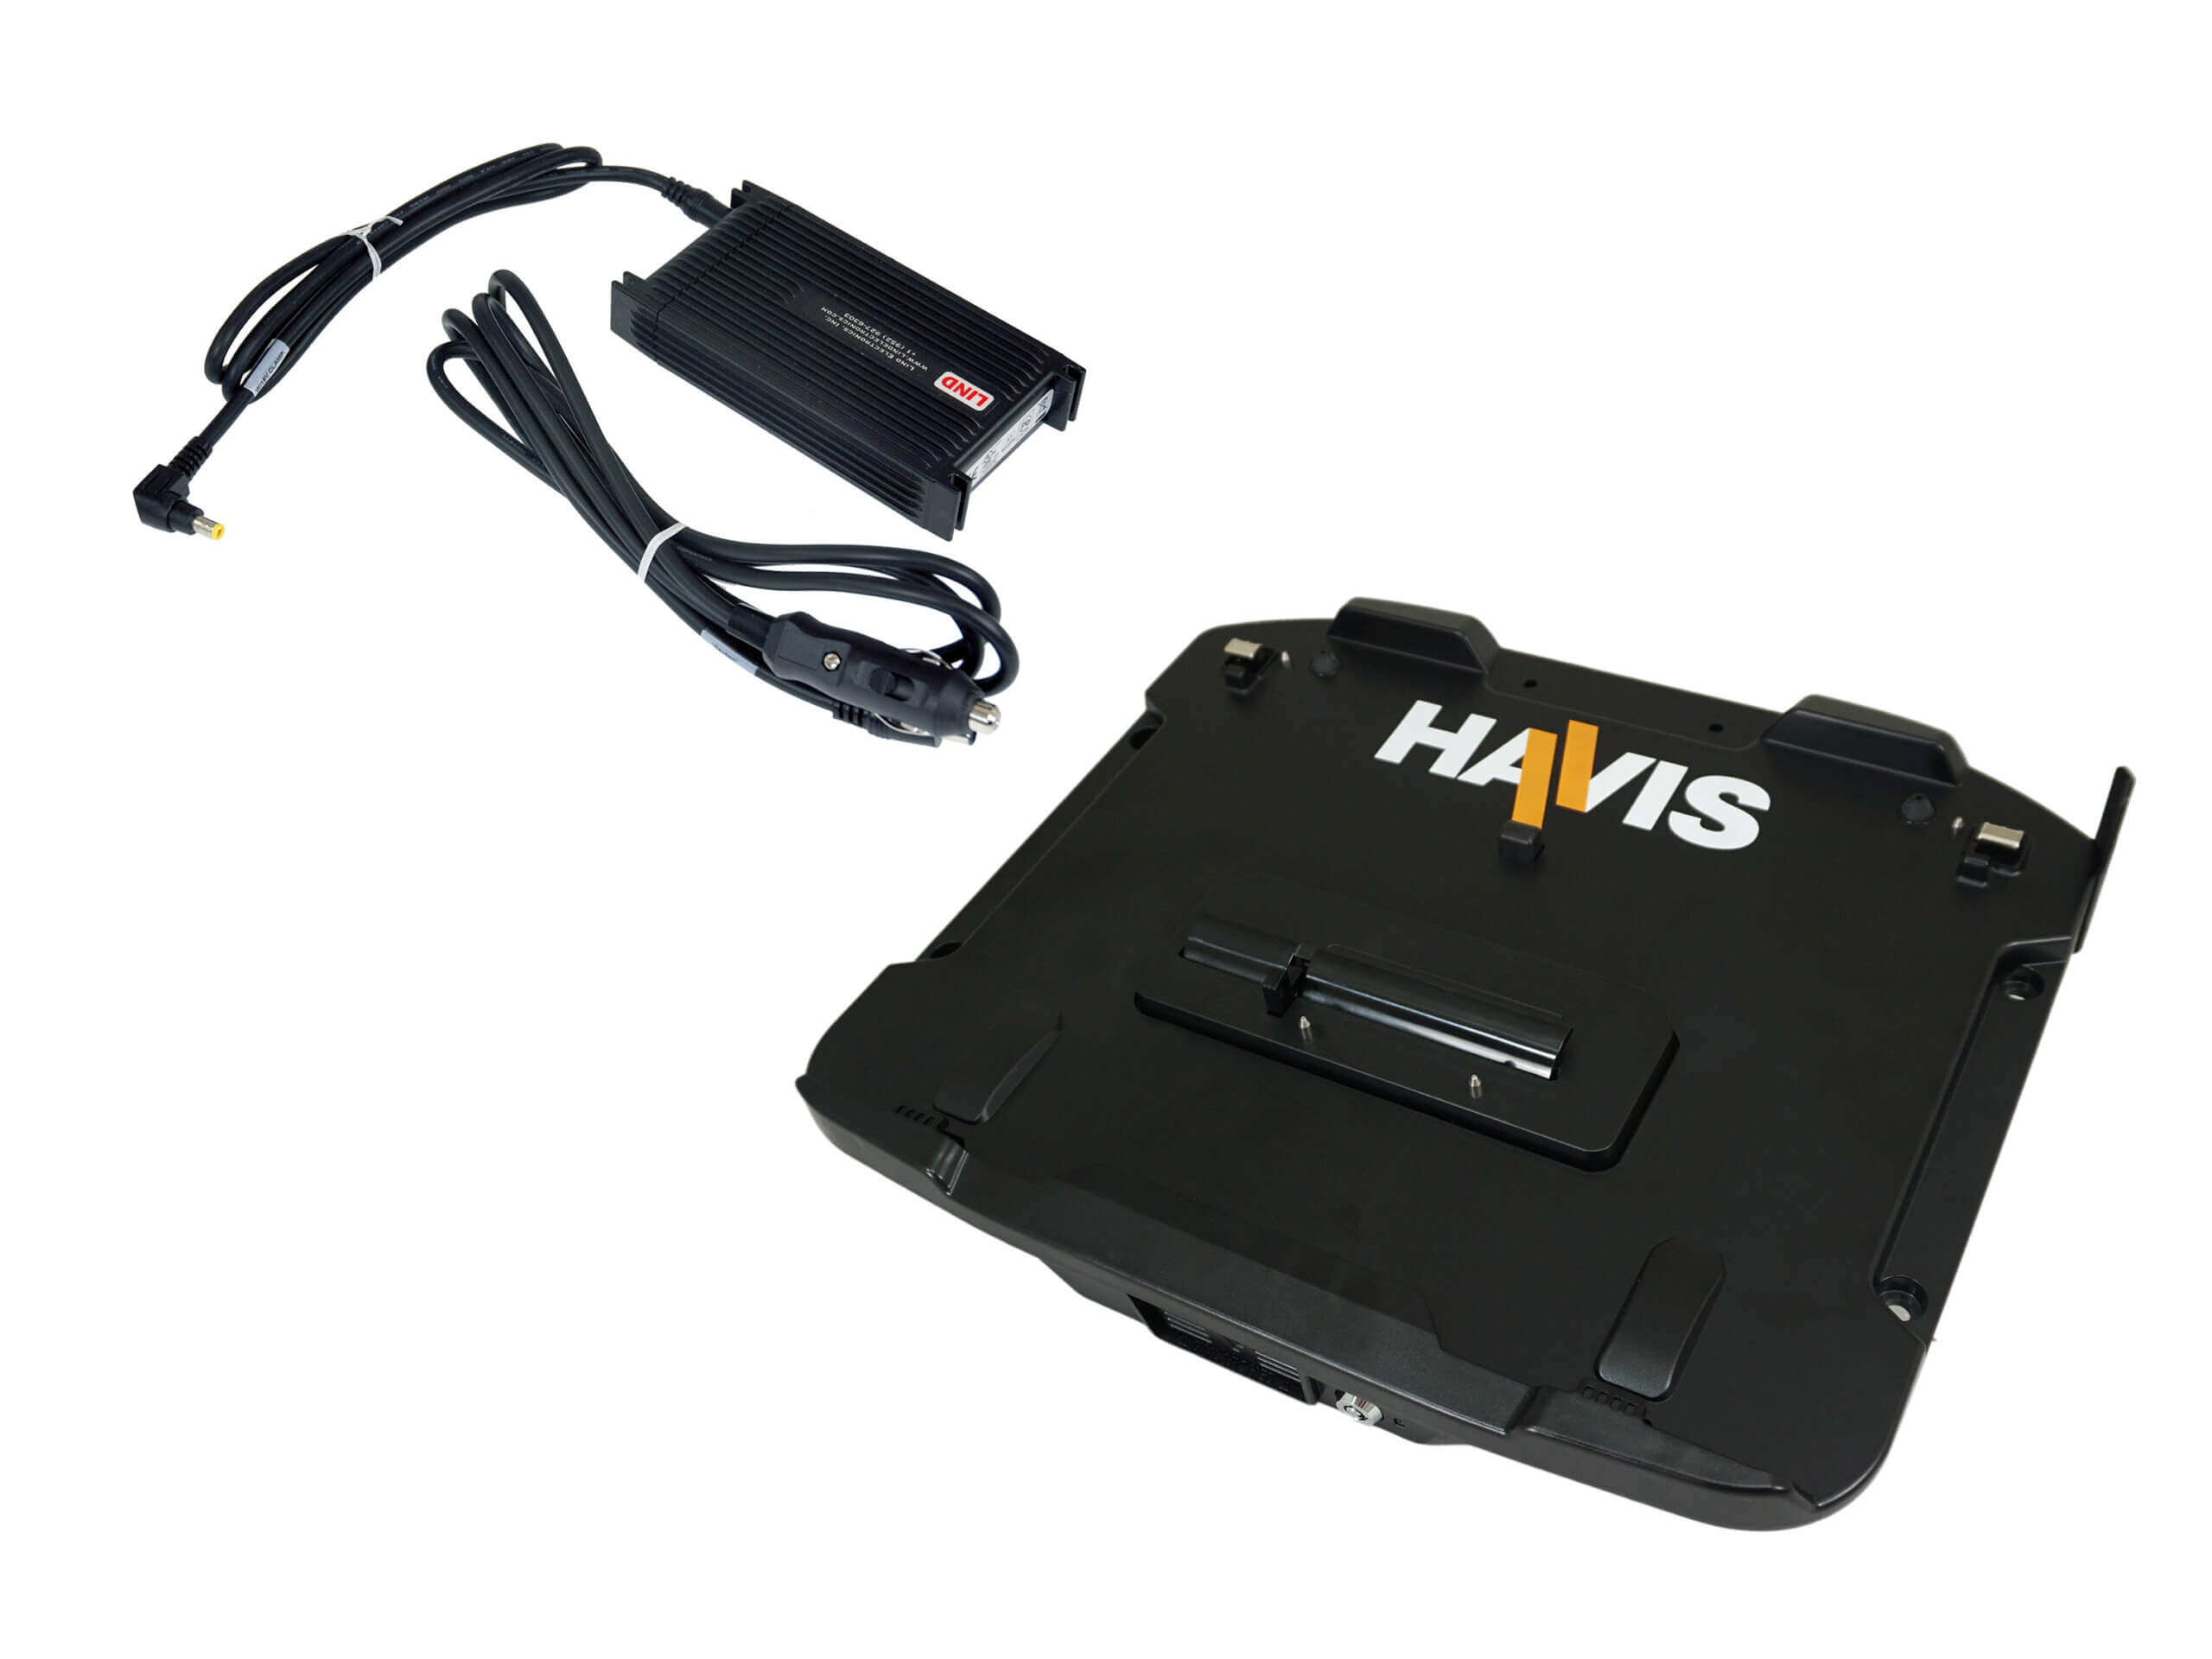 Docking Station For Panasonic TOUGHBOOK 40 Laptop with Standard Port Replication & Quad Pass-Thru Antenna Connections & LIND Power Supply